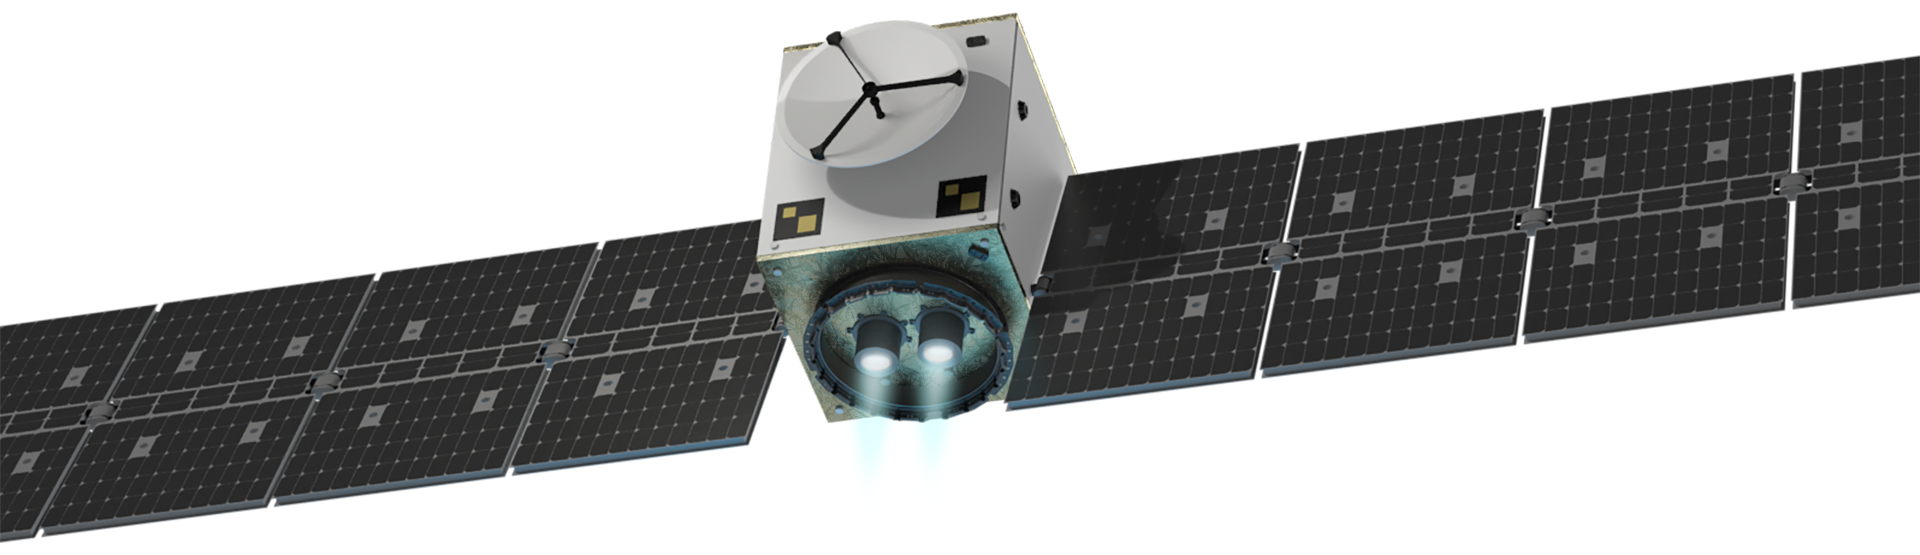 The MULTIPURPOSE ELECTRIC SATELLITE PLATFORM ESKIMO shown at an isometric view from below. The white cubic satellite body between the large, strechted-out solar panel wings is illuminated by the two firing ion-thrusters at the bottom, with its plumes shining in light blue.